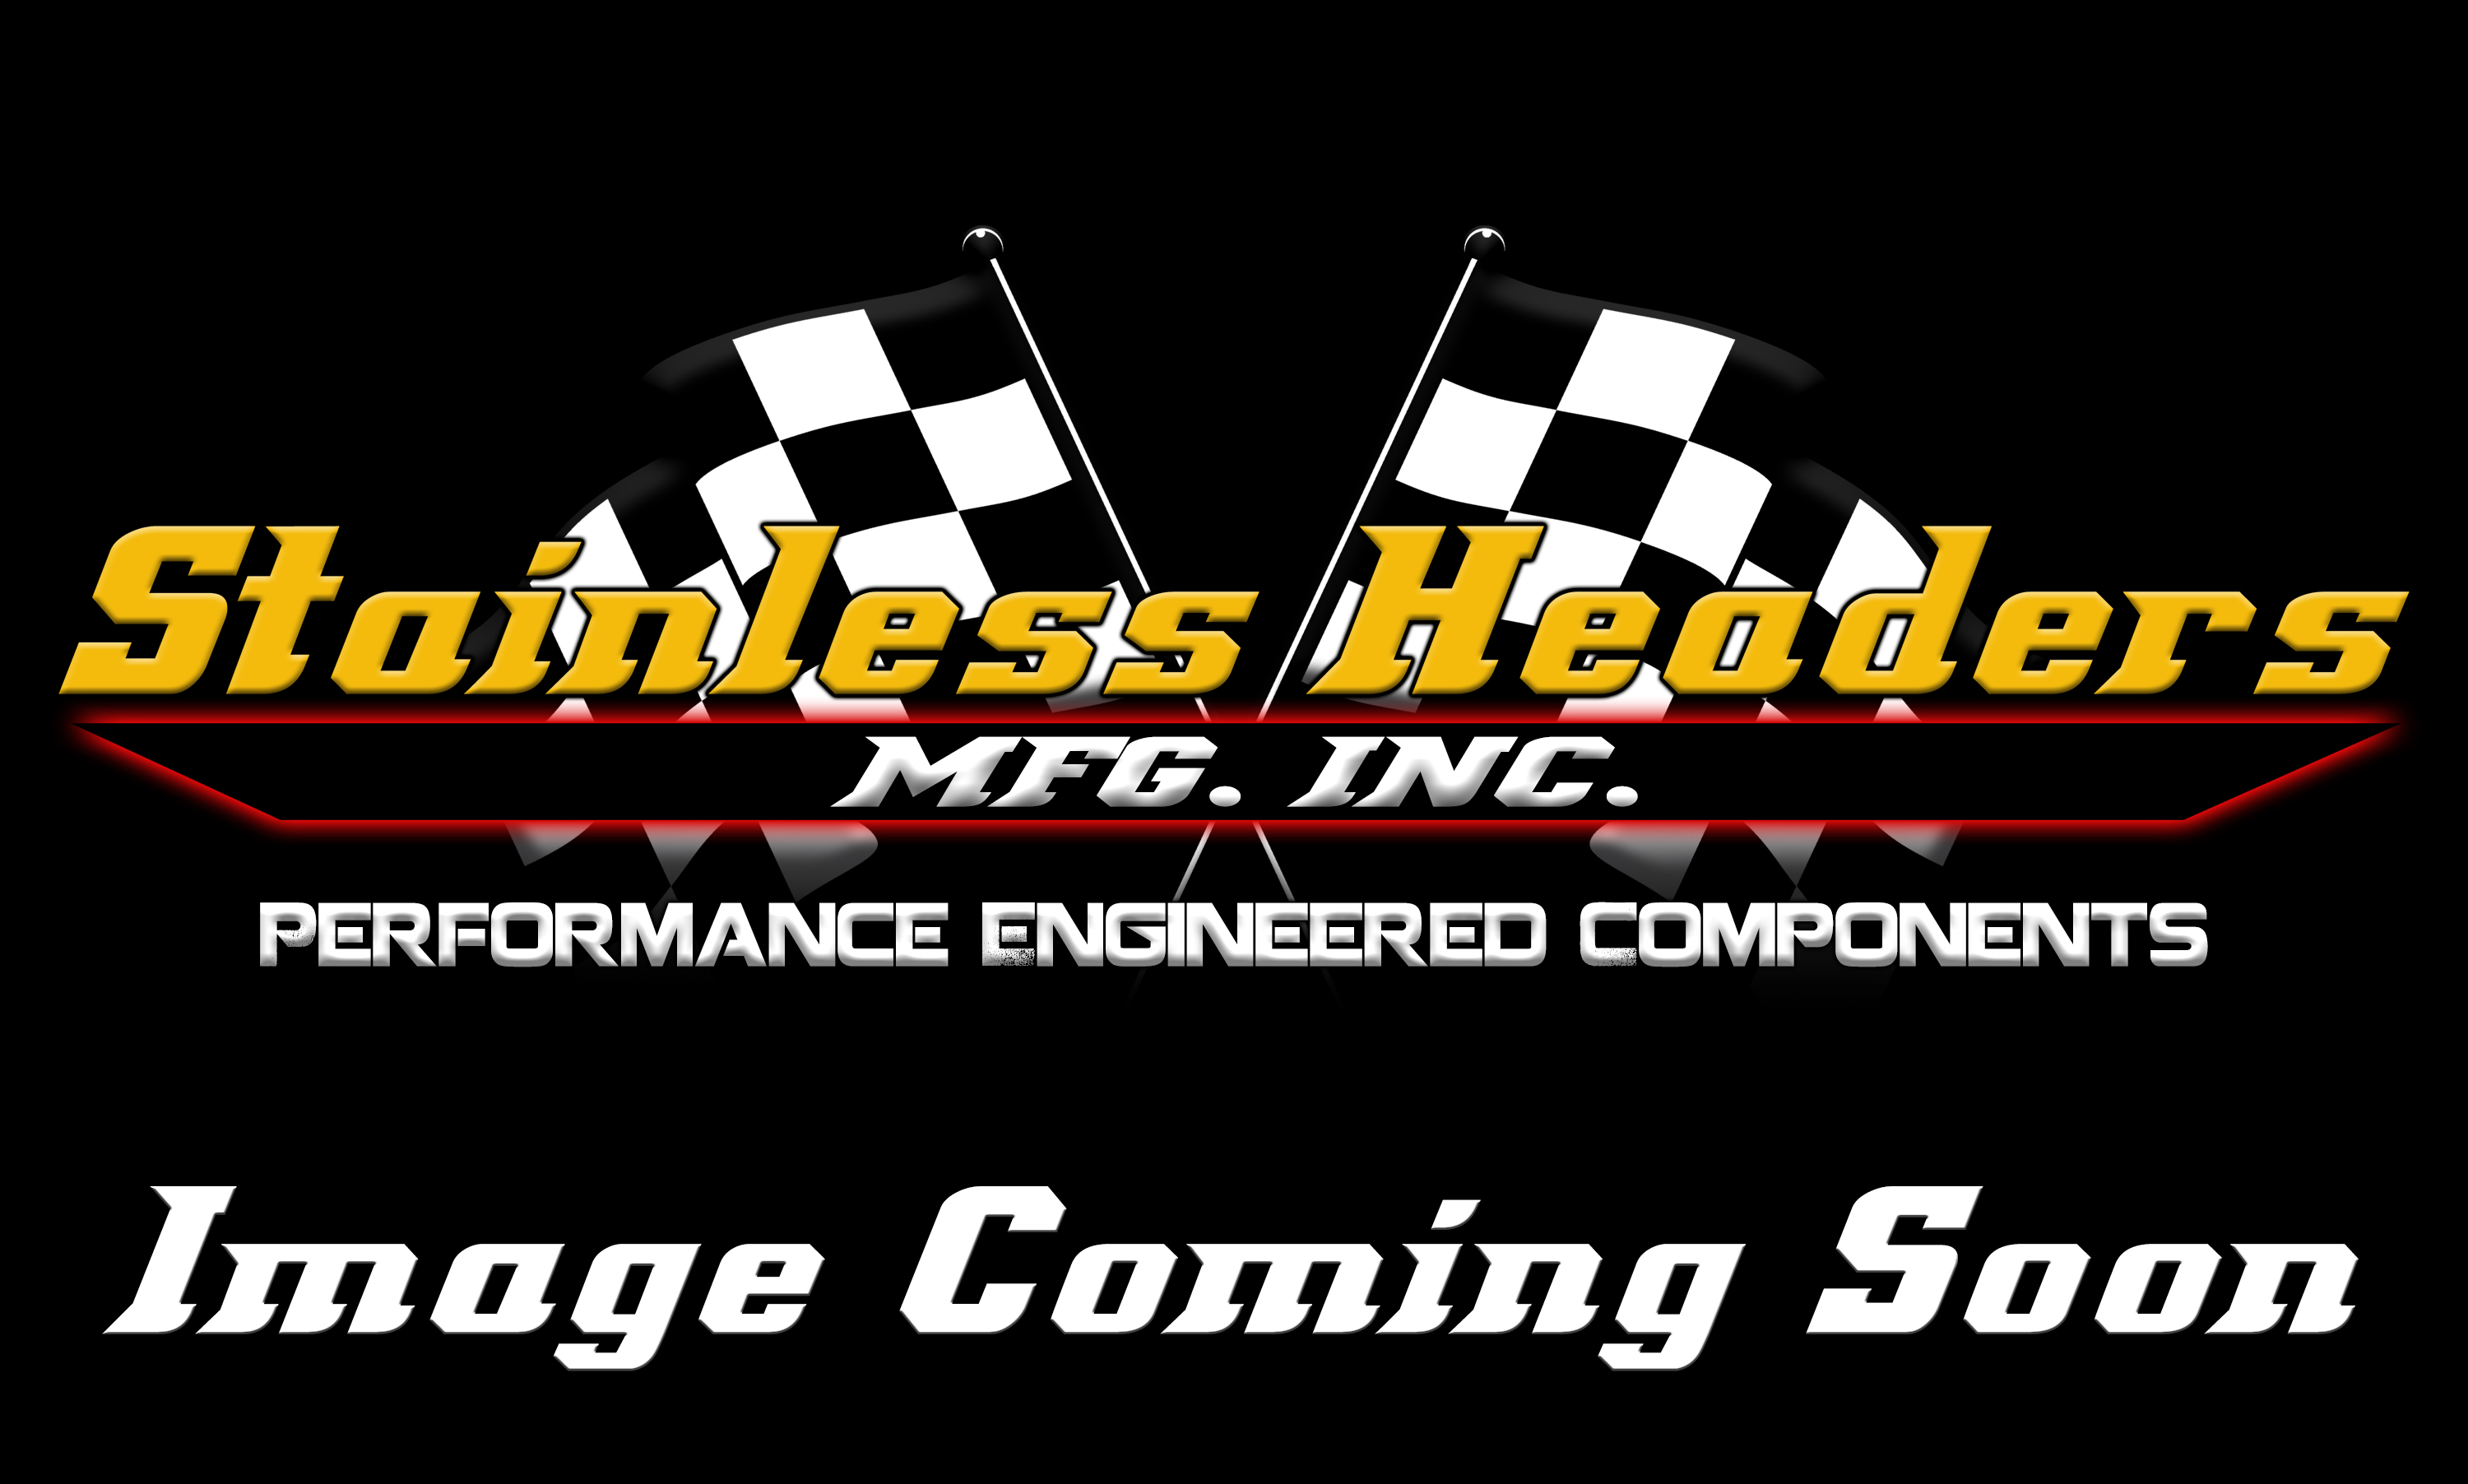 Custom Header Components - Merge Collectors - Stainless Headers - 1 1/2" Primary 3 into 1 Performance Merge Collector-16ga 321ss